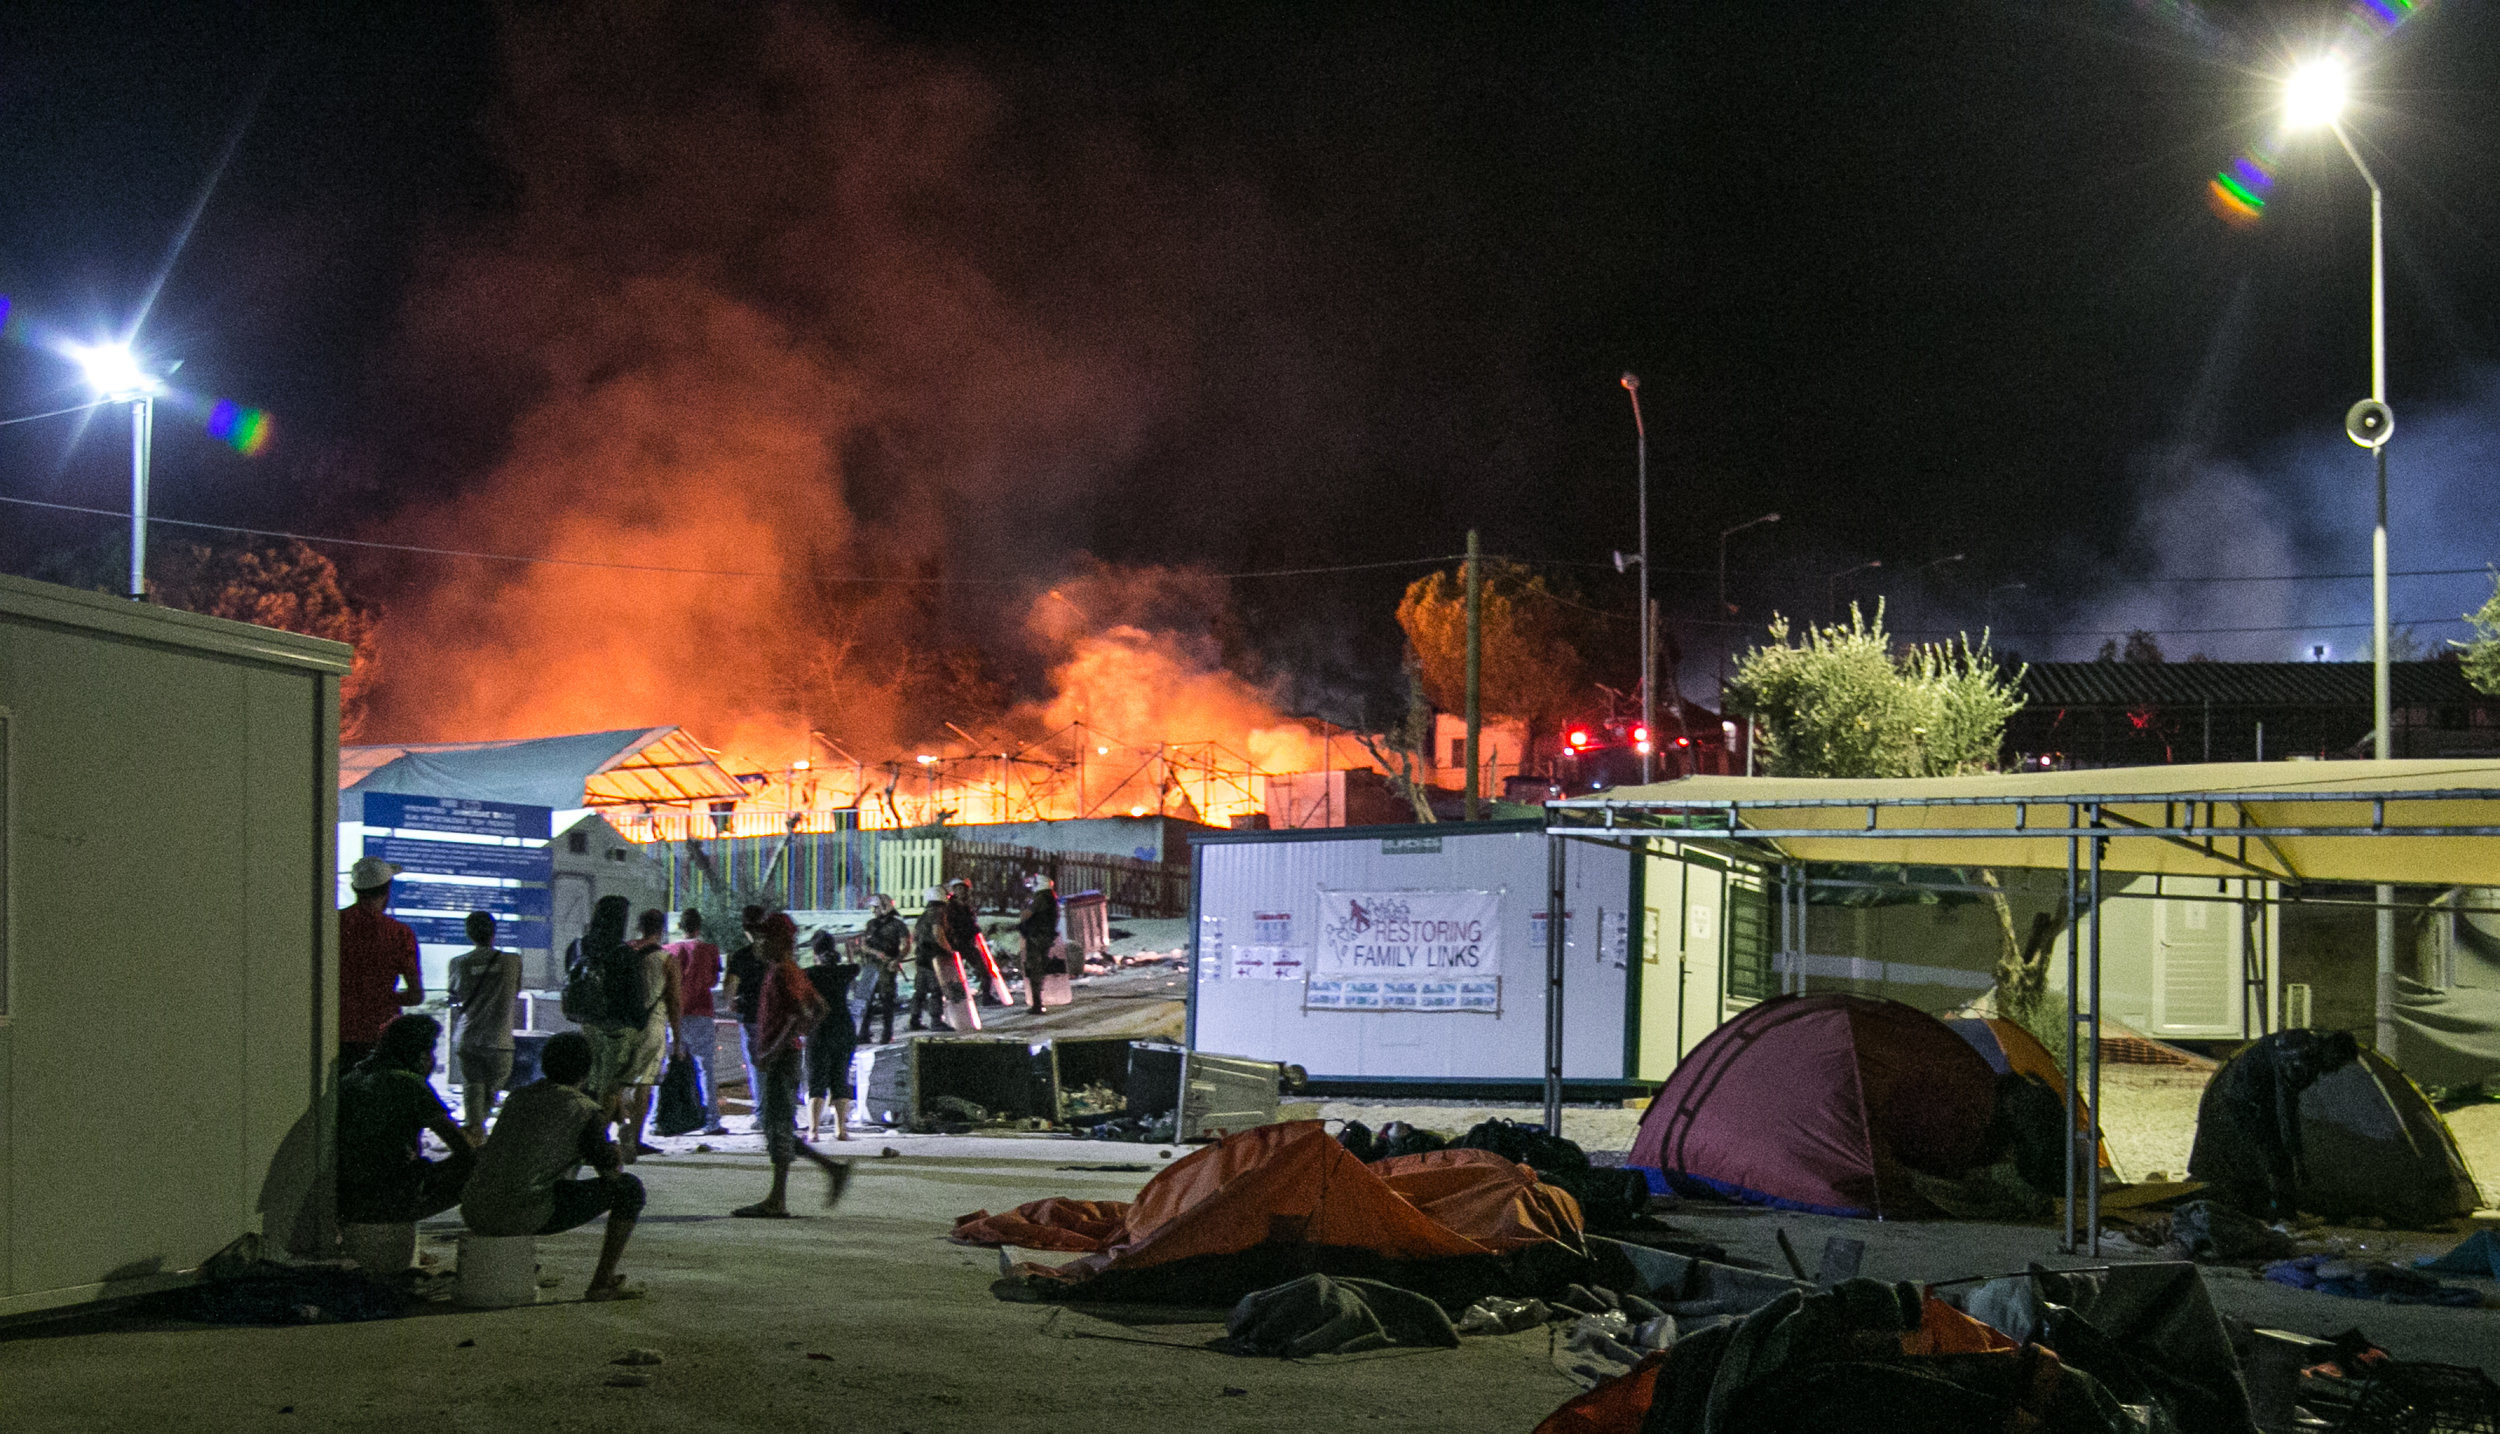  Migrants and police look on as one of the largest camps in Lesvos burns to the ground. The violence began early this morning with small incidents of rock throwing and trash burning, but quickly worsened as the day went on. According to several South